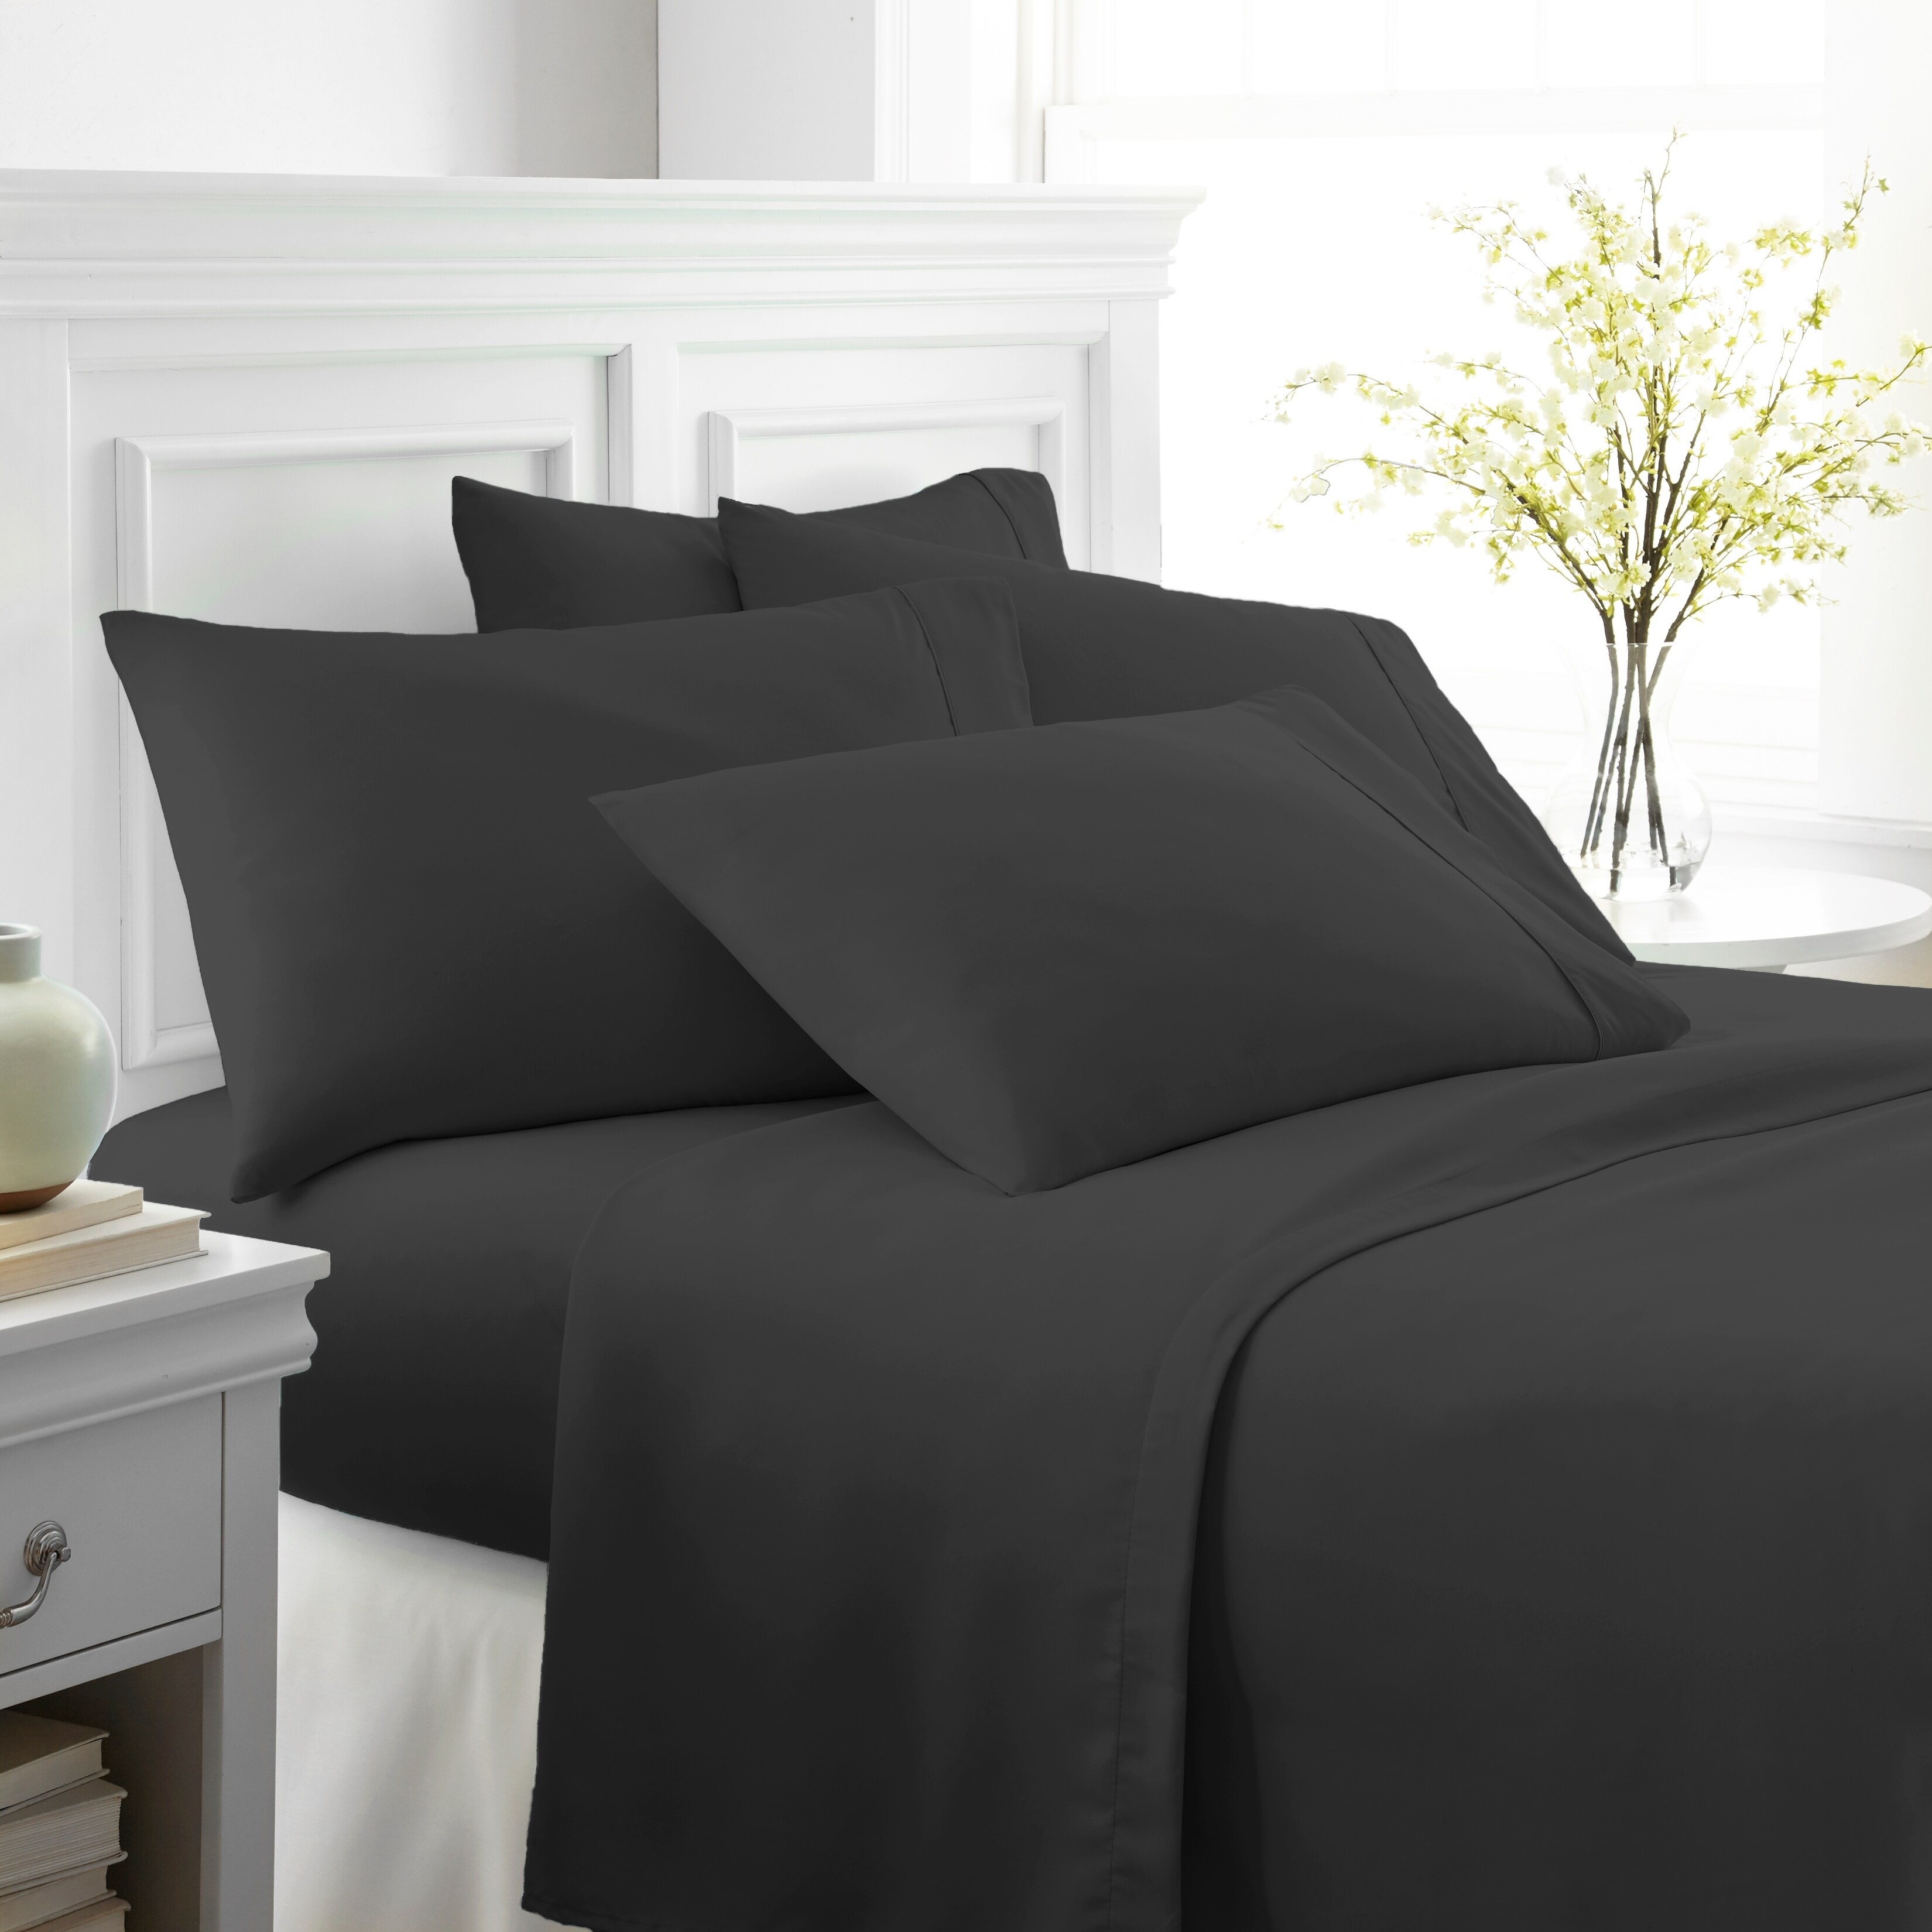 Simply Soft Premium Luxury 6 Piece Bed Sheet Set - image 5 of 5